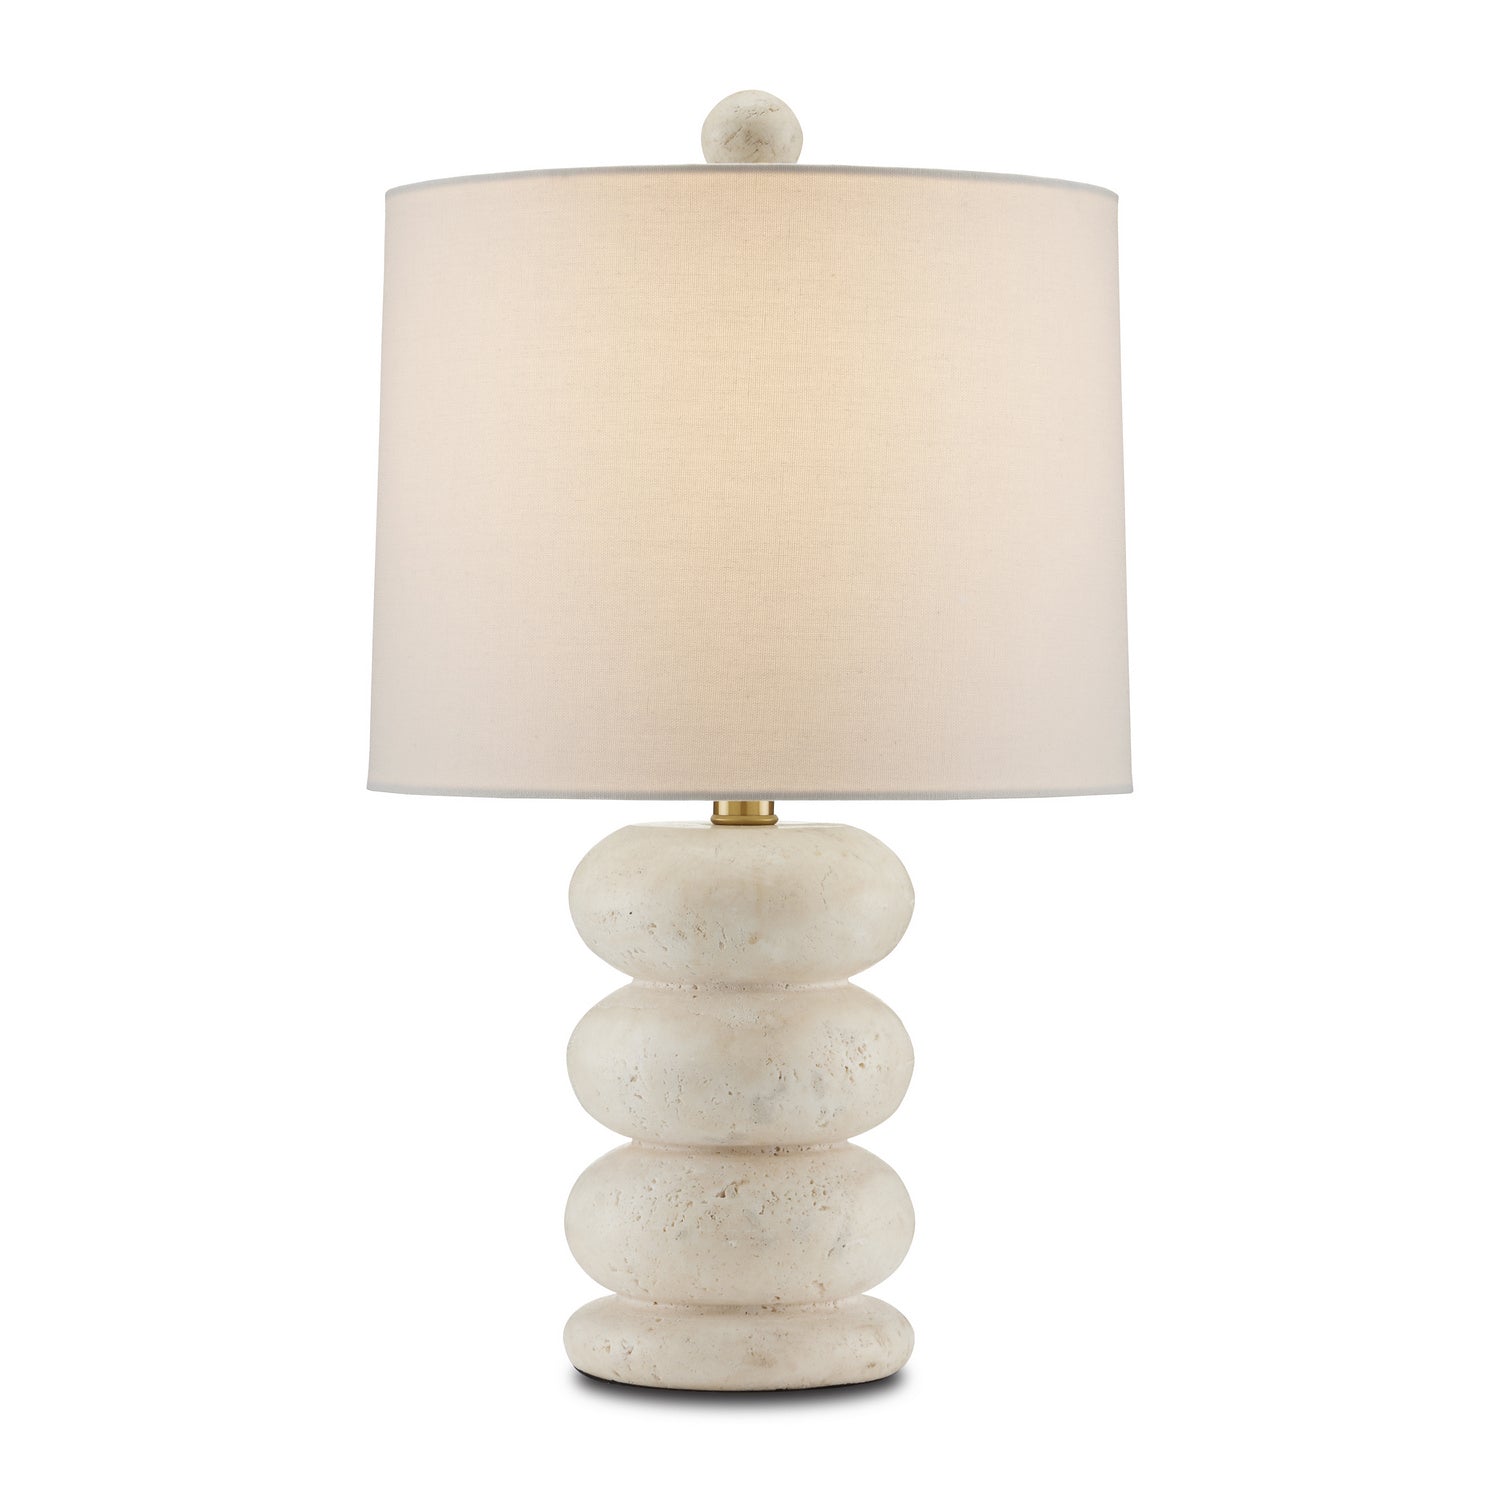 Currey and Company - 6000-0836 - One Light Table Lamp - Girault - Beige/Antique Brass